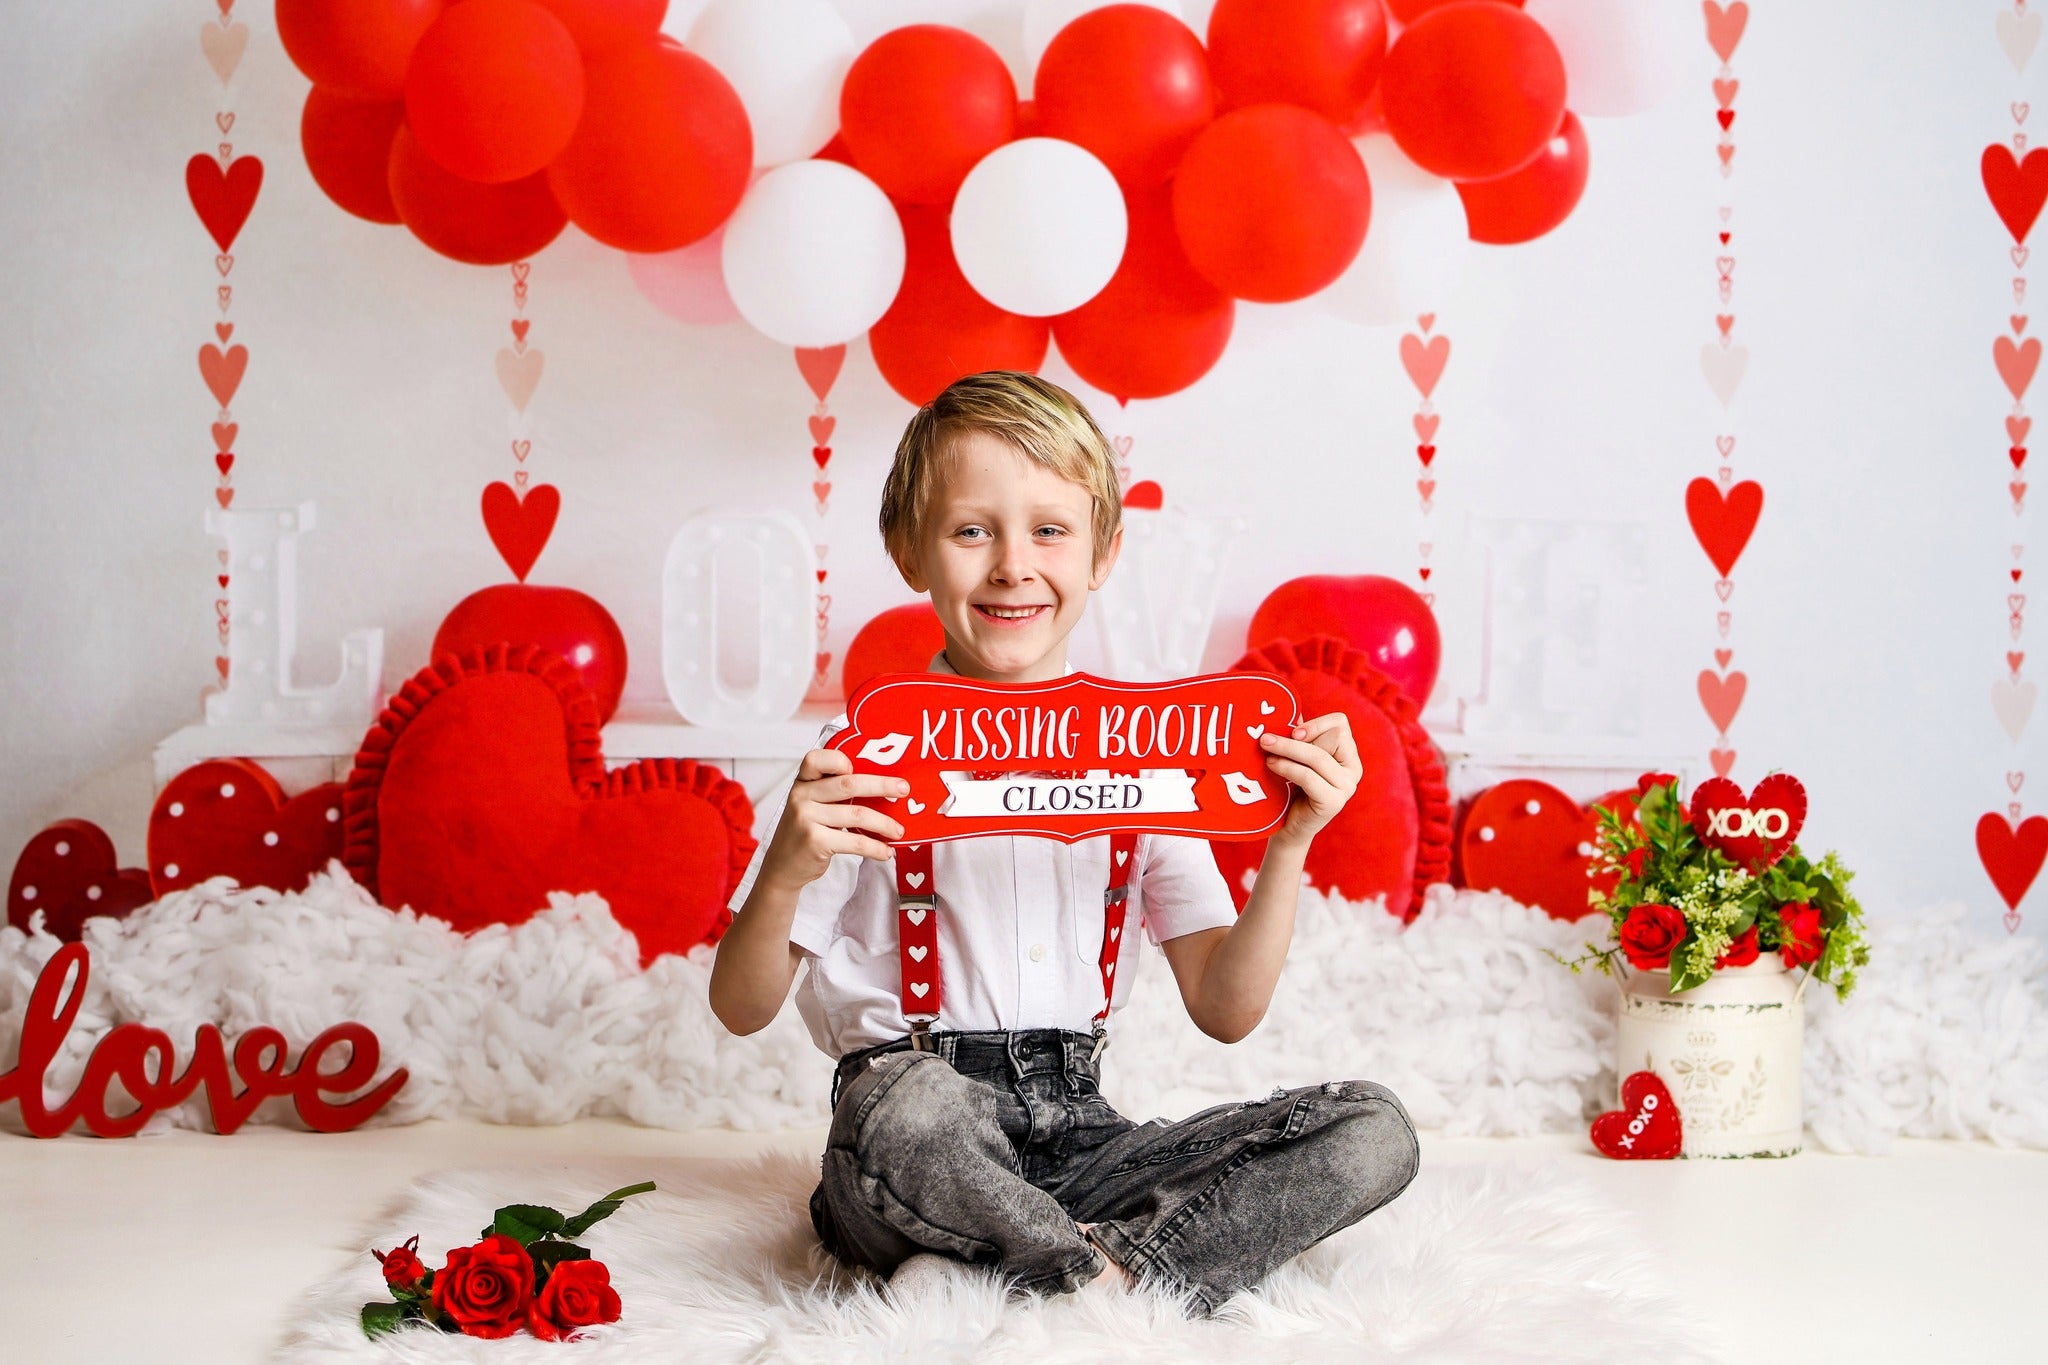 Kate Valentine's Day Backdrop Balloons Love Heart Designed by Uta Mueller Photography